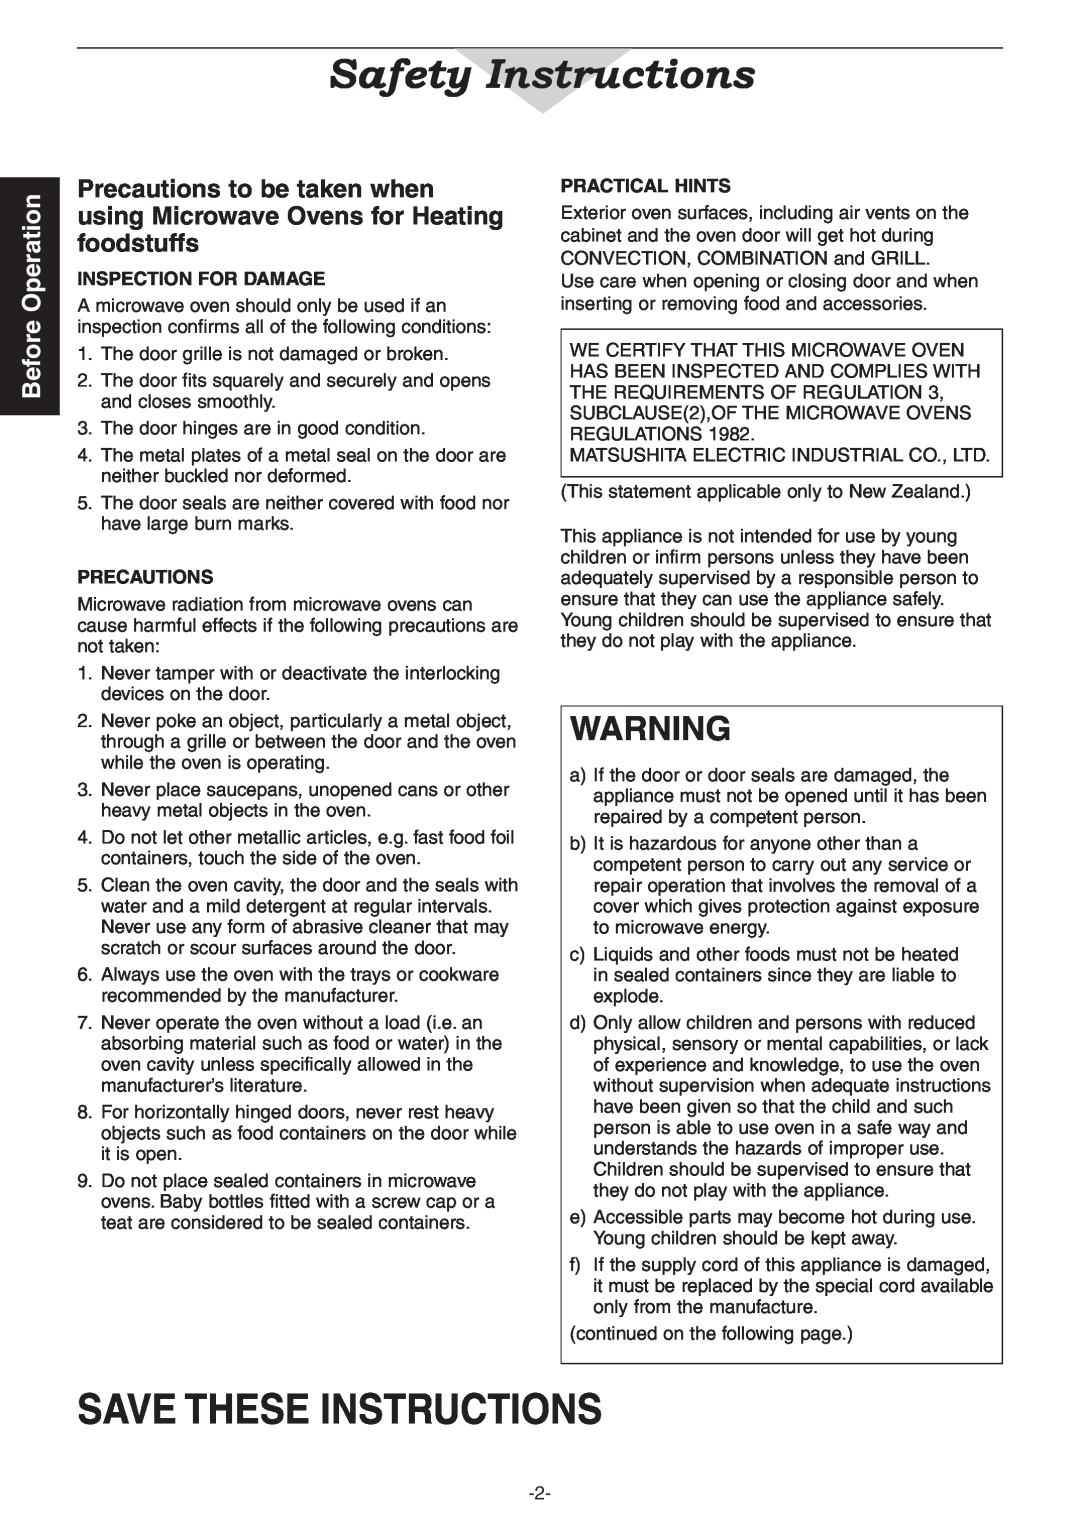 Panasonic NN-CD987W, NN-CD997S operating instructions Safety Instructions, Before Operation, Save These Instructions 